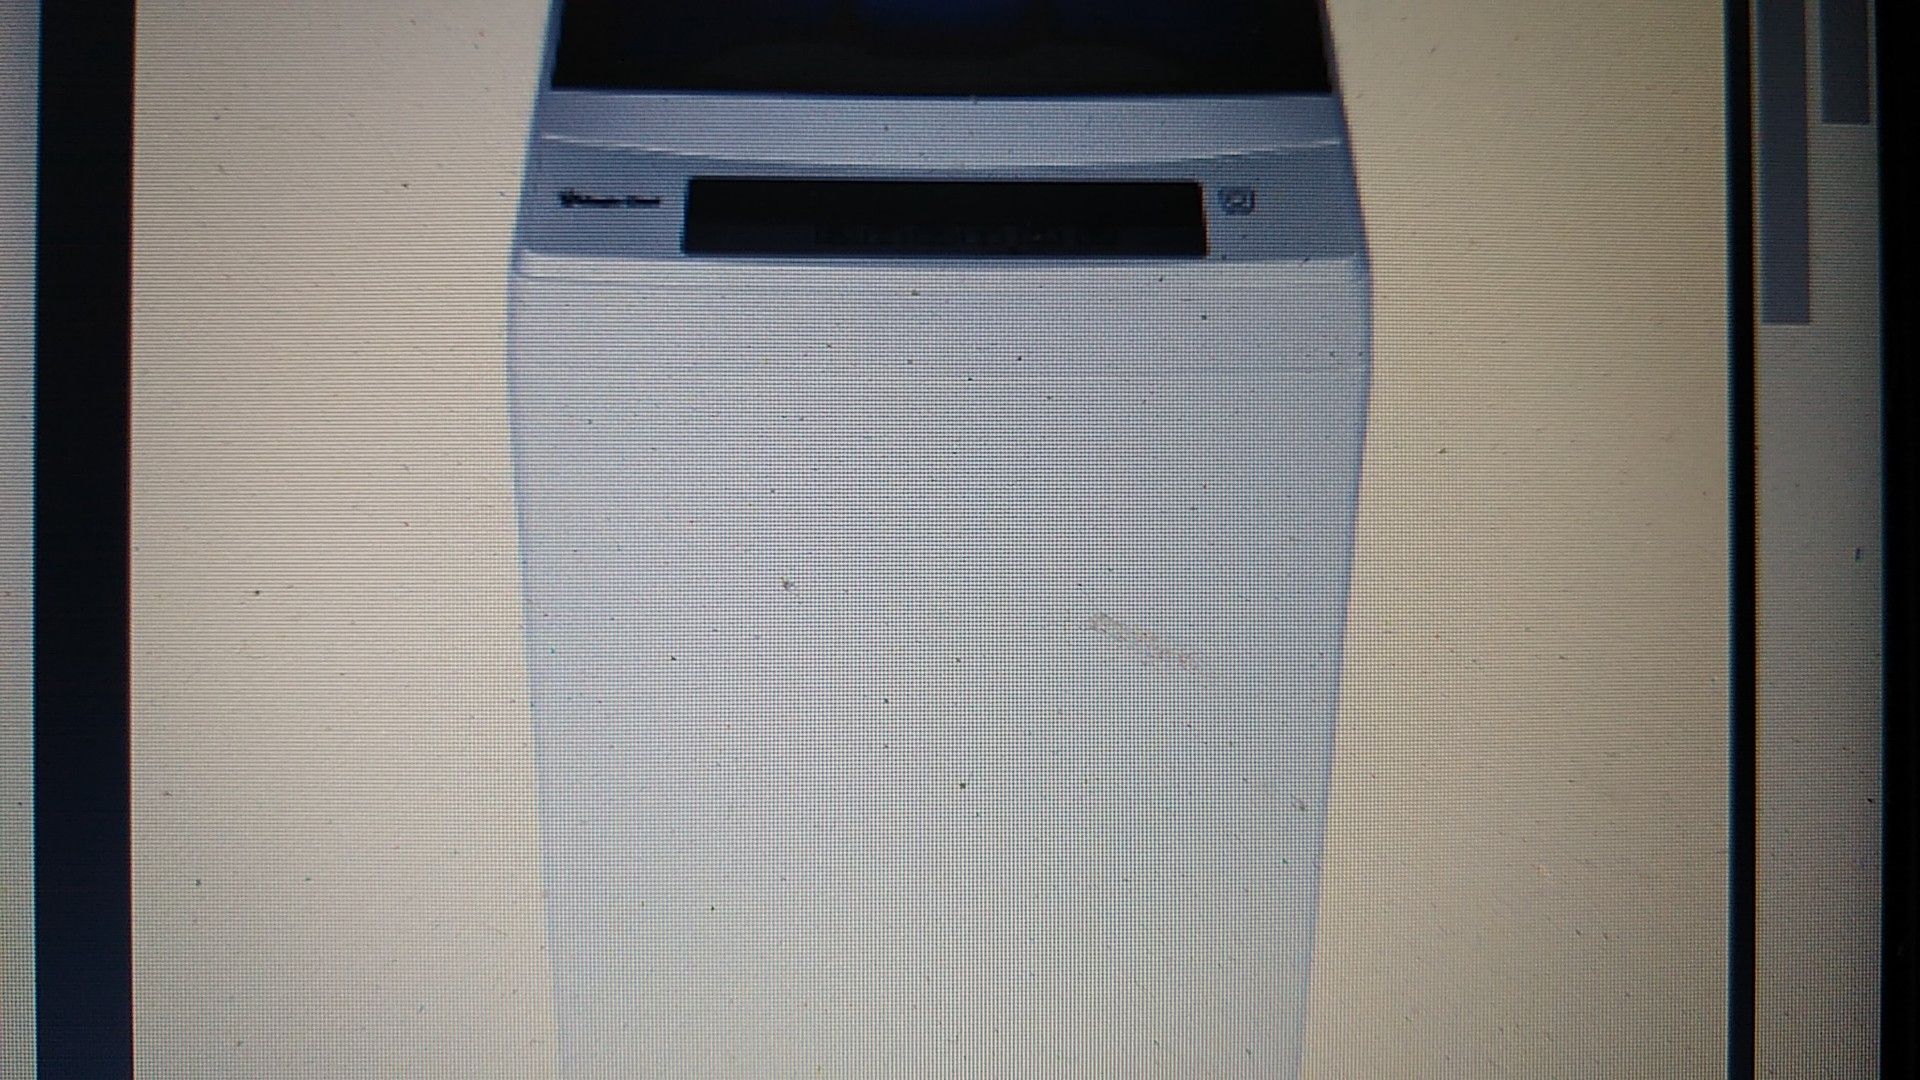 Magic Chef 1.6 cu. ft. TopLoad Compact Washer, White